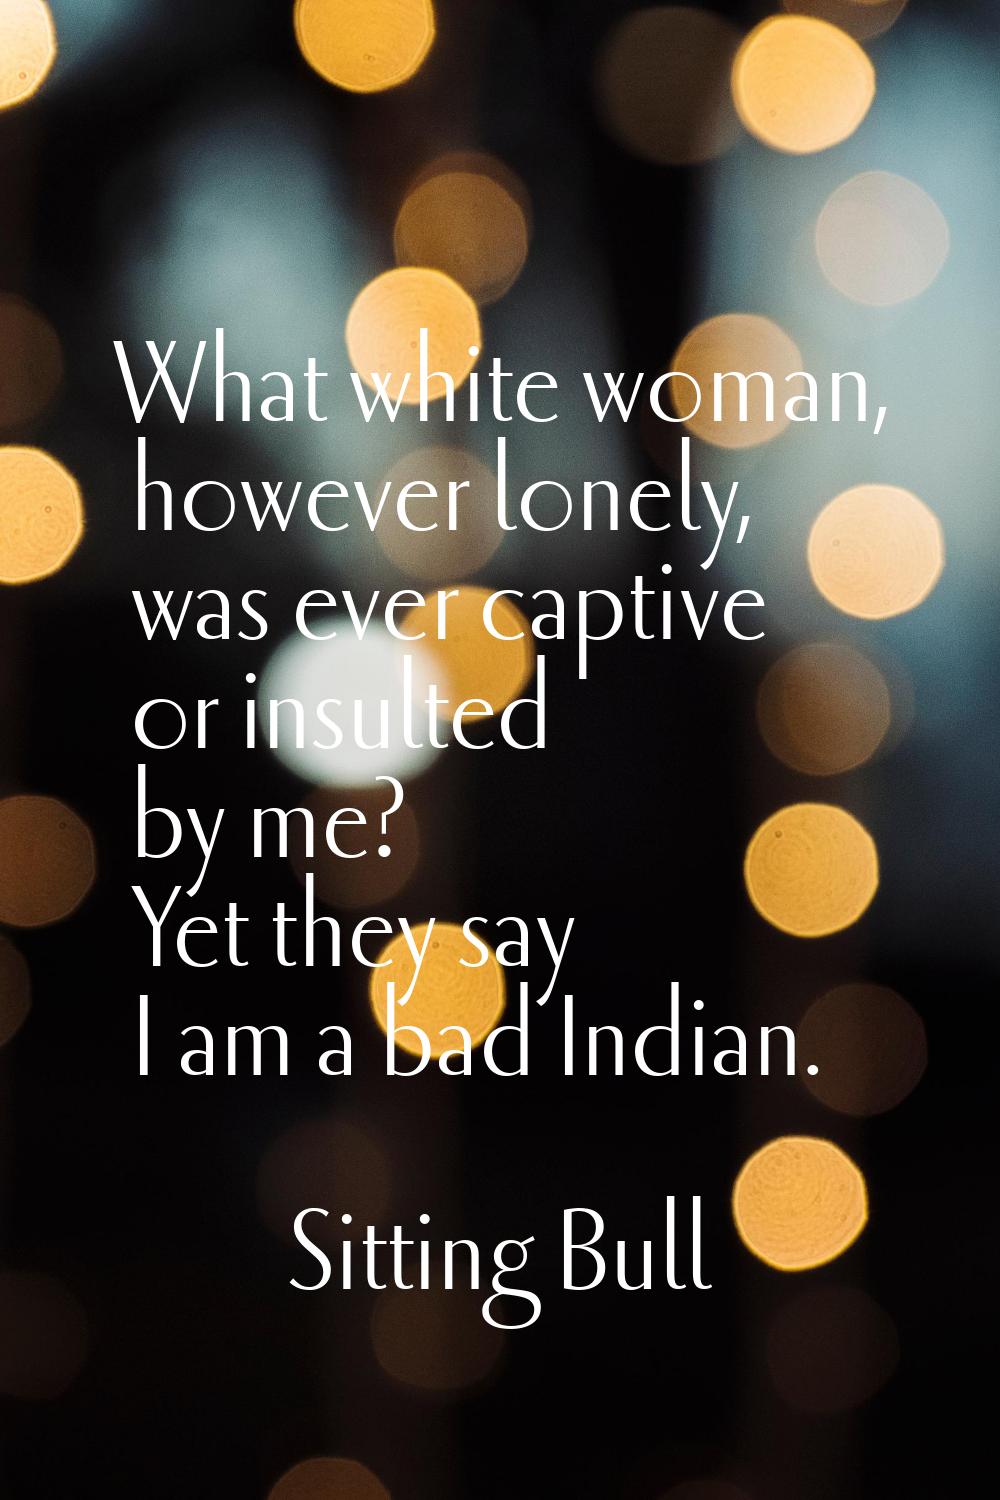 What white woman, however lonely, was ever captive or insulted by me? Yet they say I am a bad India